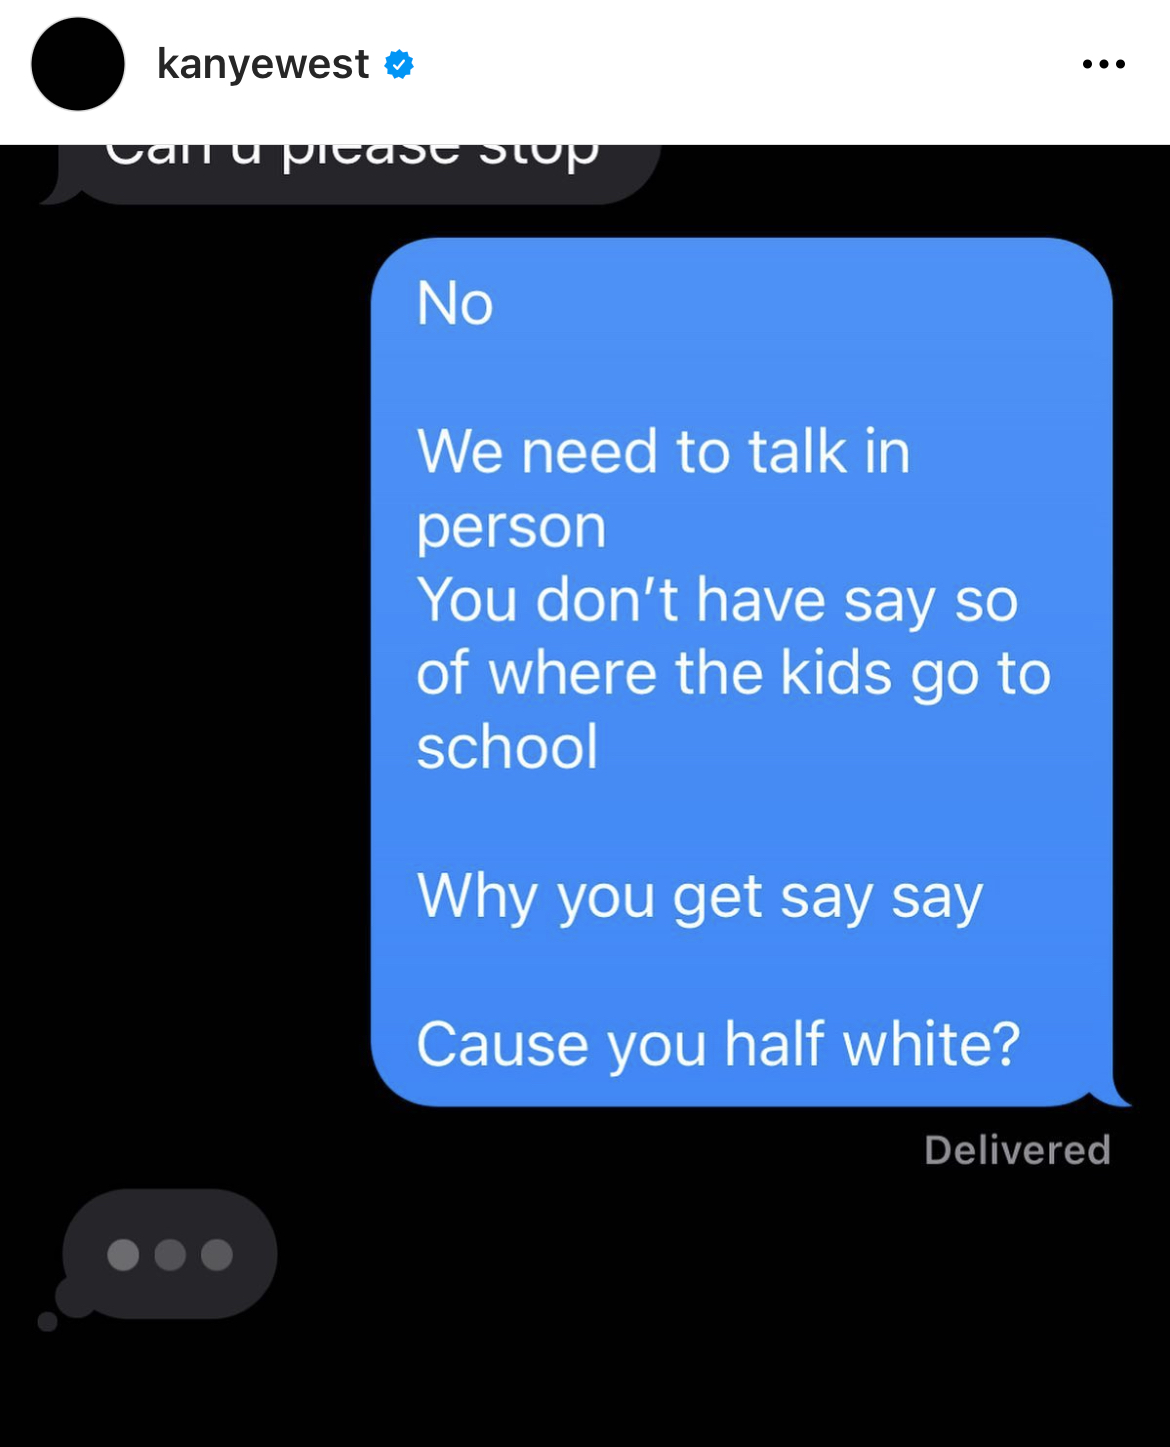 Kanye West Instagram Meltdown - favorite person kanye - kanyewest Can u please stop No We need to talk in person You don't have say so of where the kids go to school Why you get say say Cause you half white? Delivered